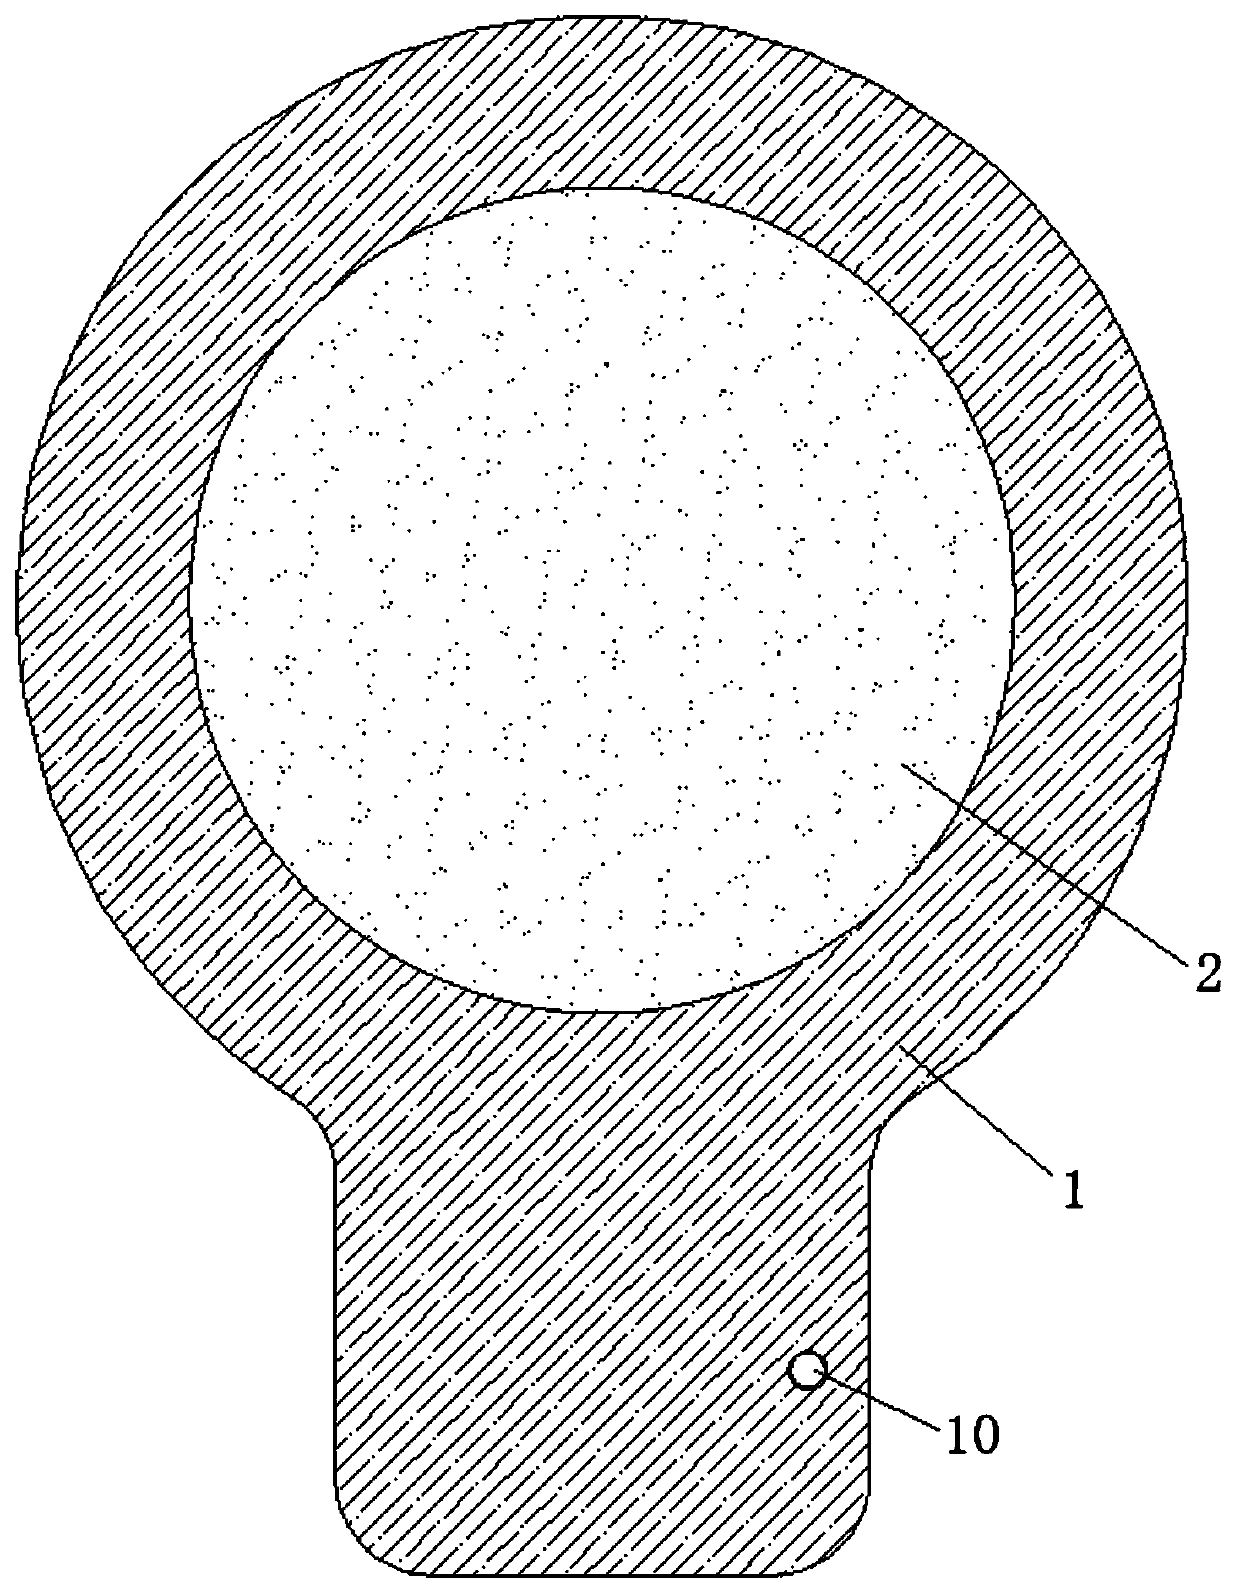 Fire-fighting unmanned aerial vehicle lens cleaning device capable of preventing smoking based on magnetic force change